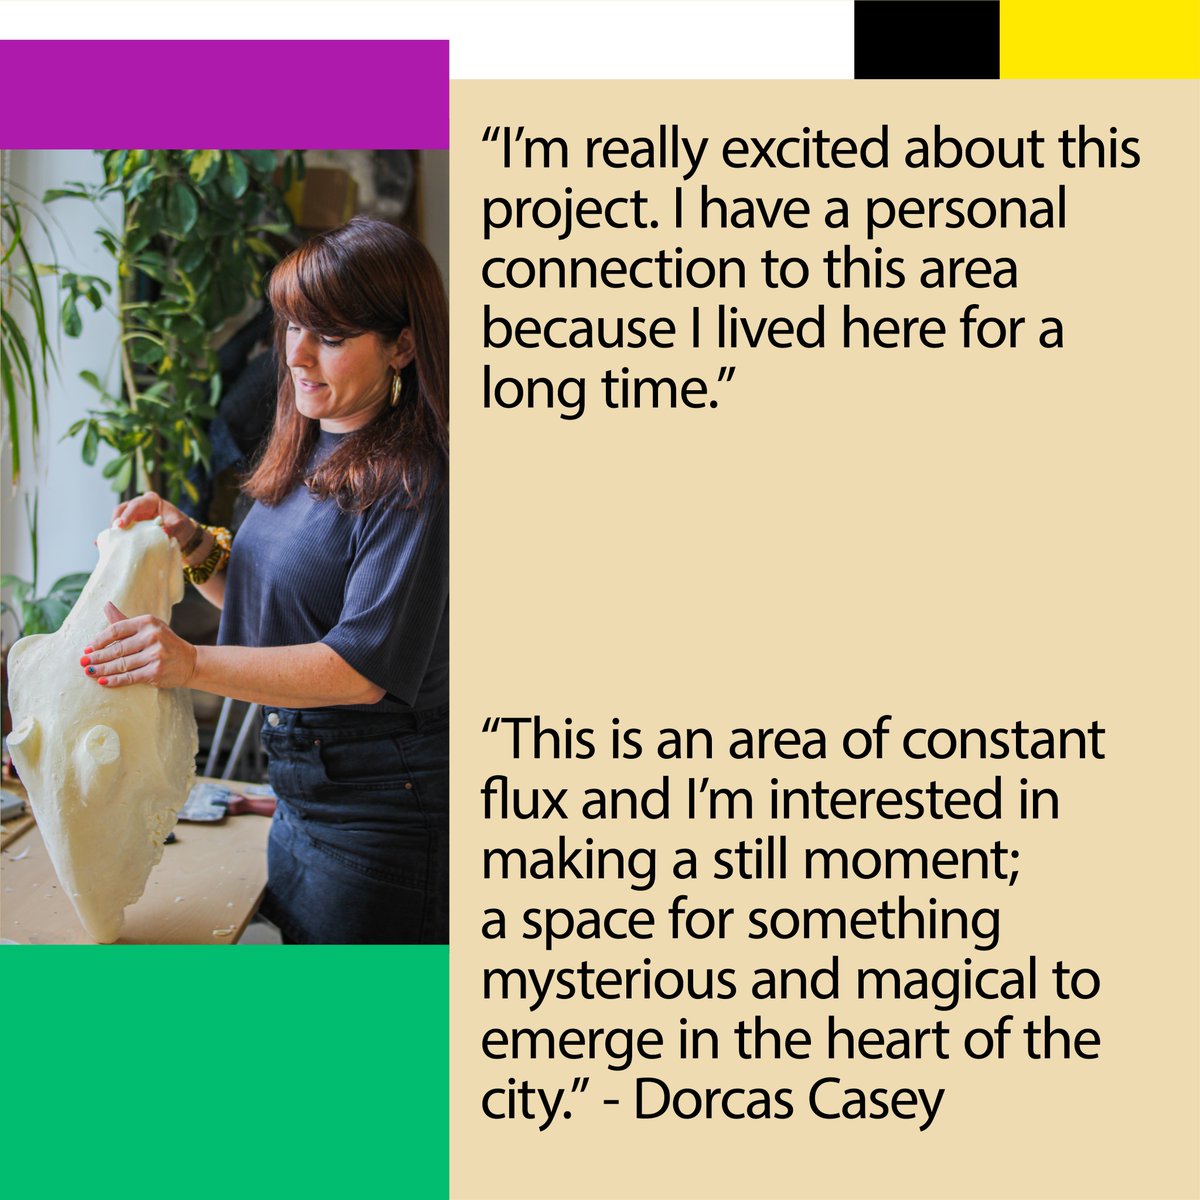 We're thrilled to announce that #DorcasCasey has been selected as the artist for the new major #PublicArt commission at #WelcomeBuilding® Find out more here: tinyurl.com/WelcomeBuildin…